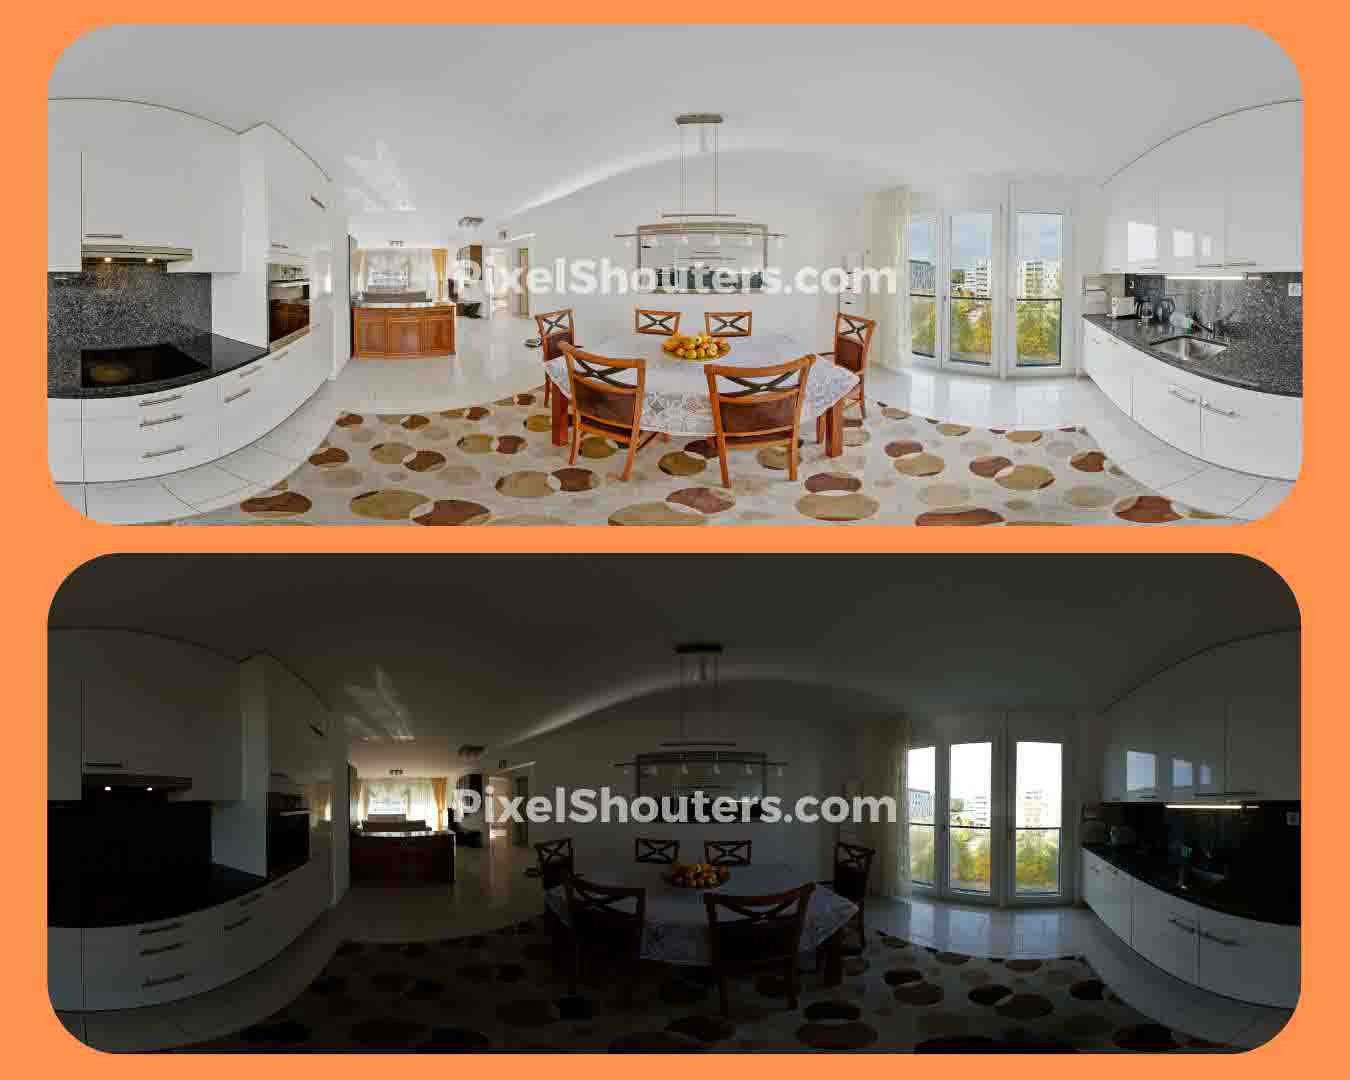 Real Estate Panorama Photo Stitching And Editing services